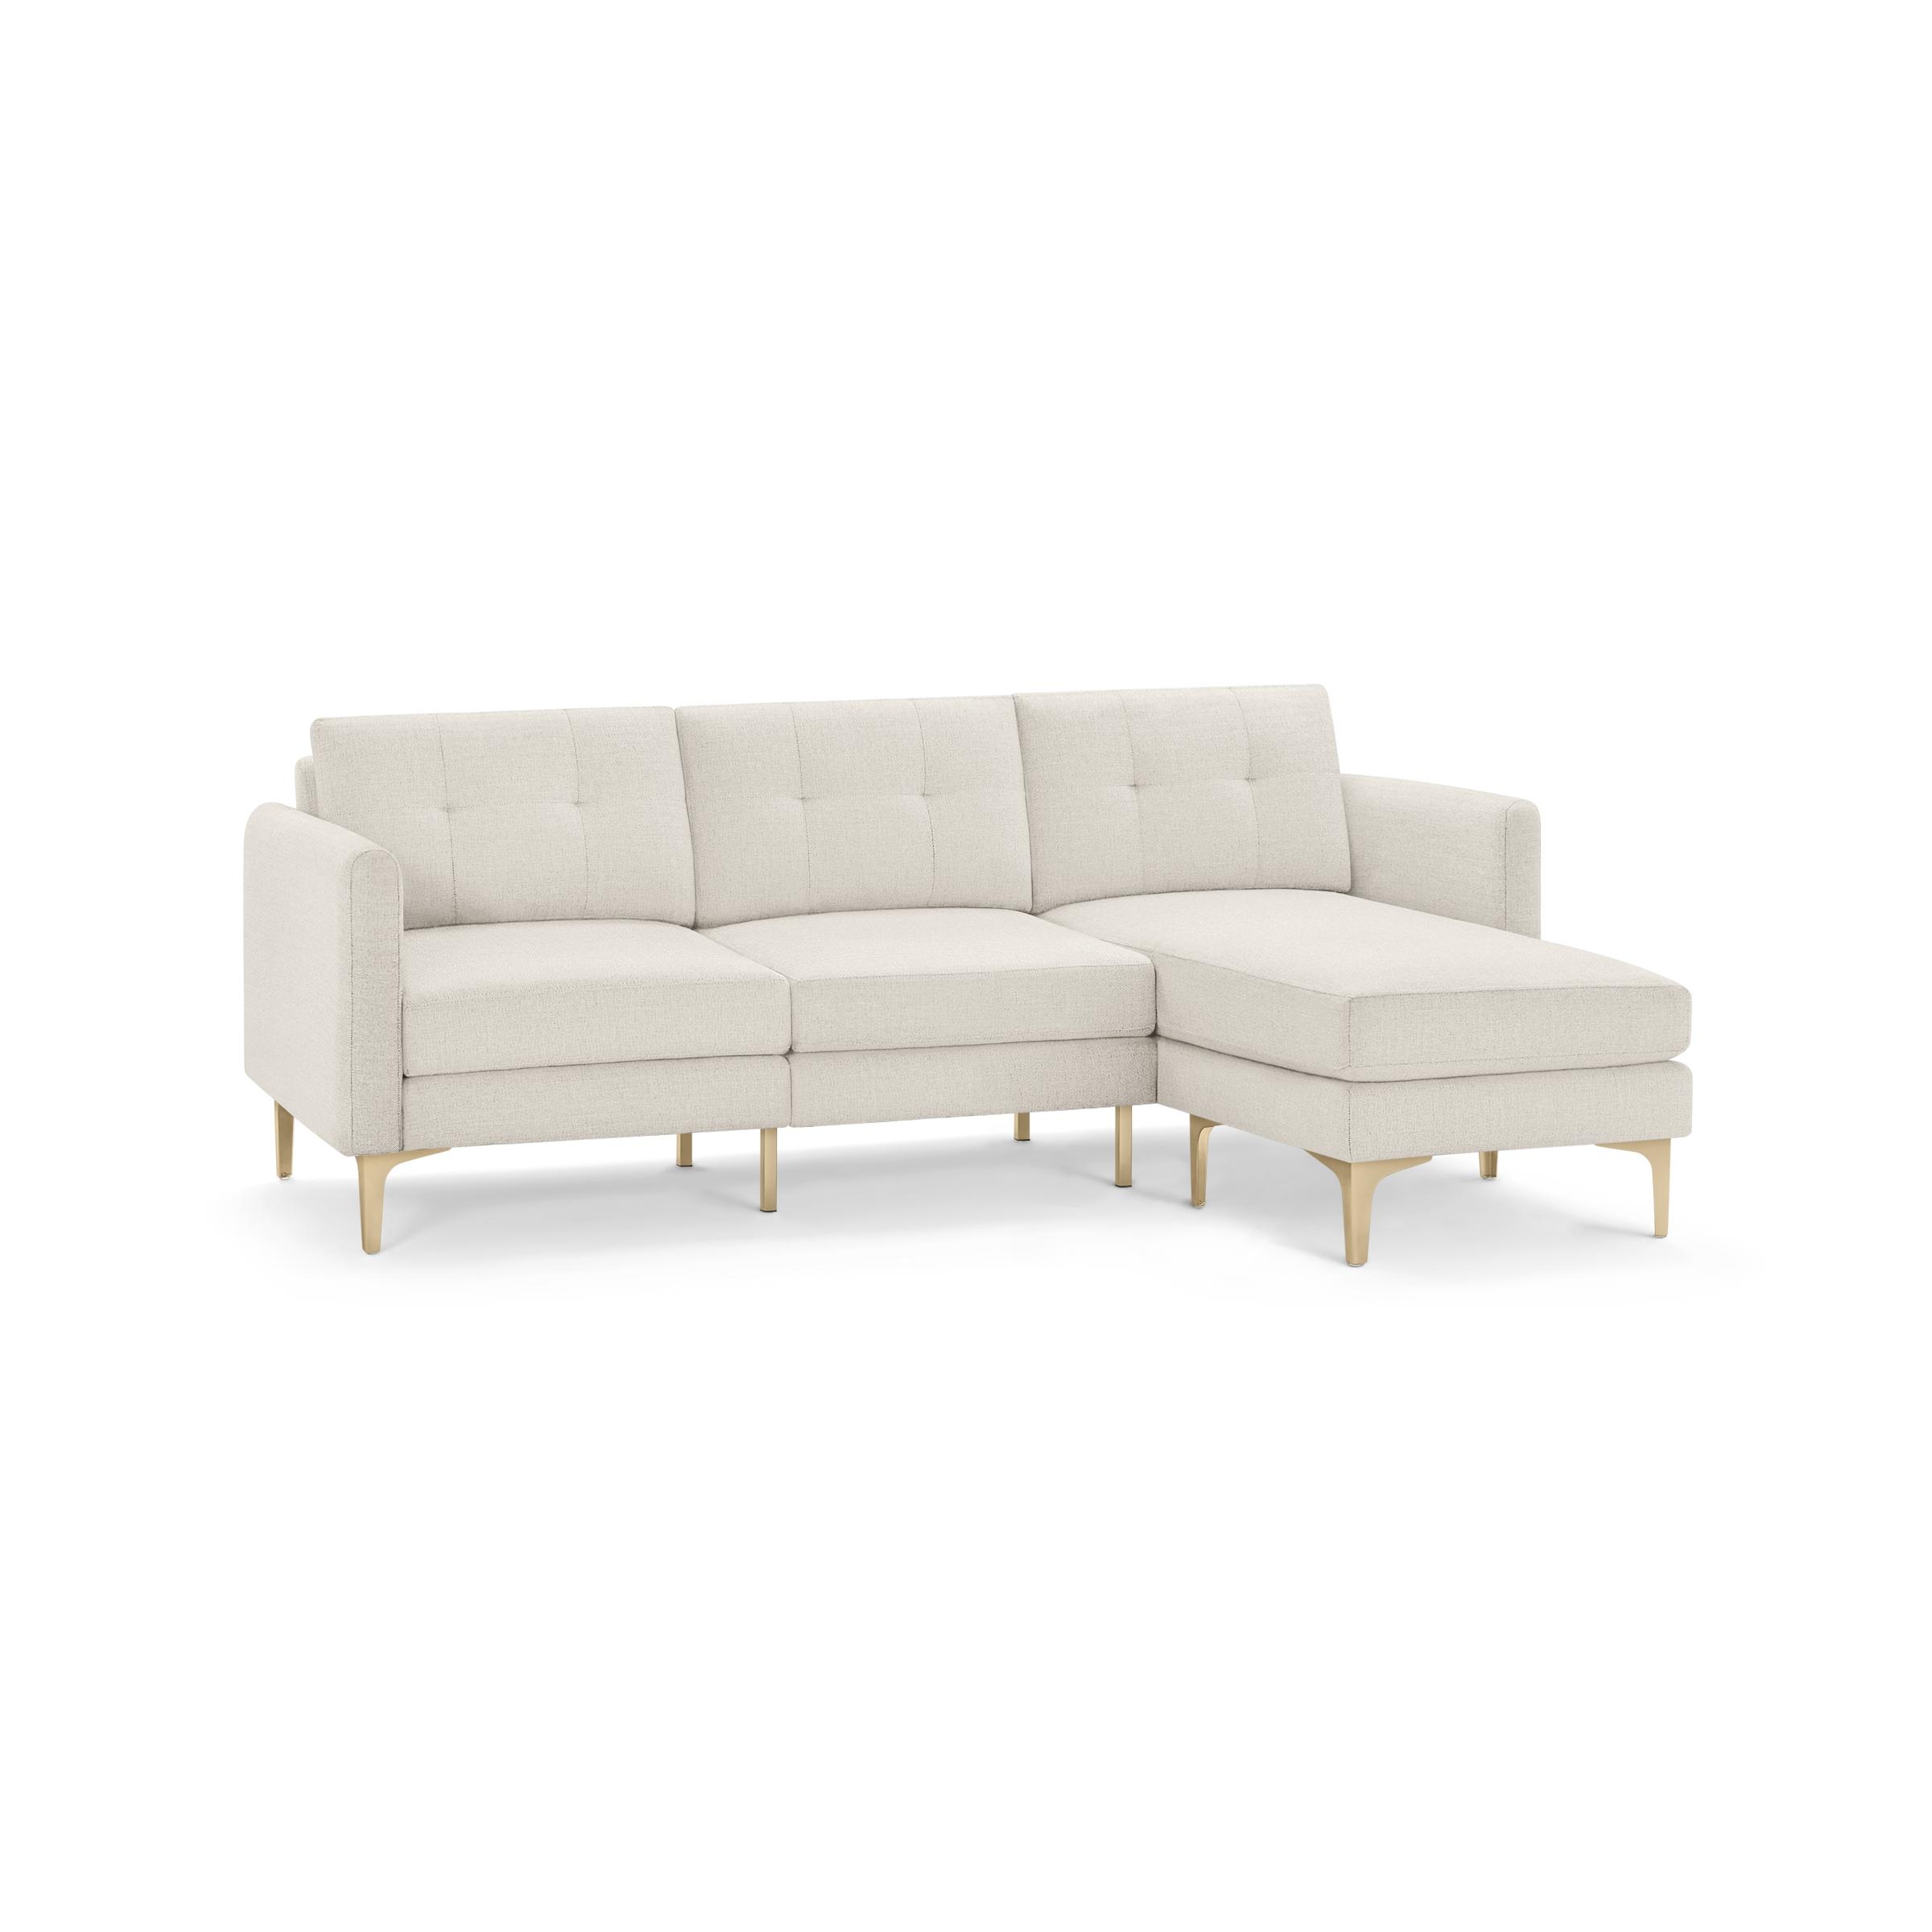 The Arch Nomad Sectional Sofa in Ivory - Image 1